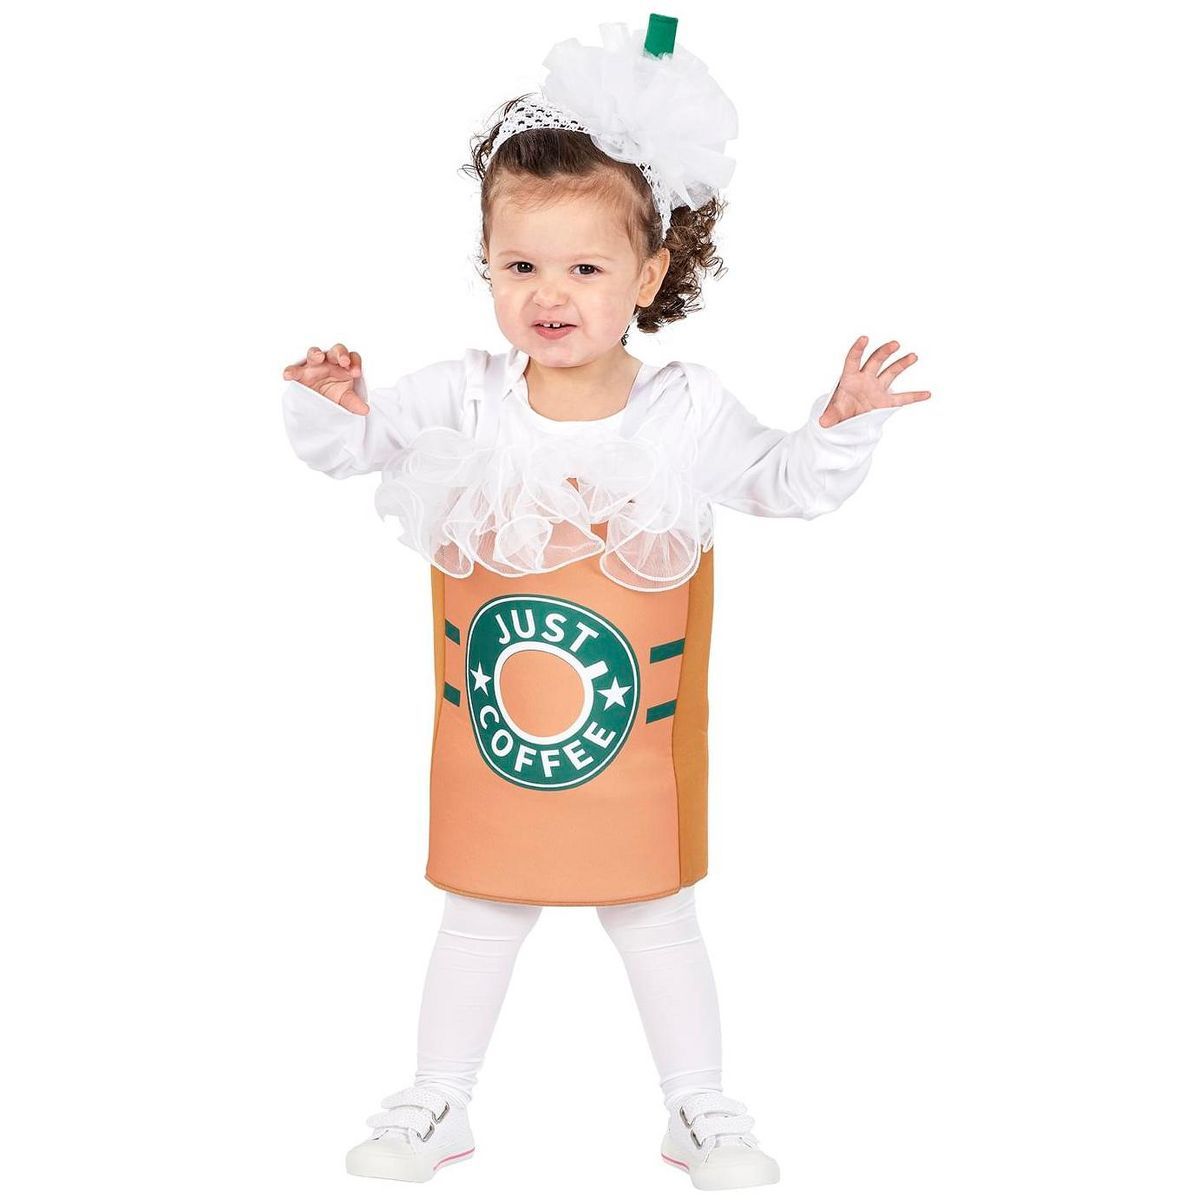 Orion Costumes "Just Coffee" Toddler Costume with Tunic & Headpiece | One Size | 12-18 Months | Target